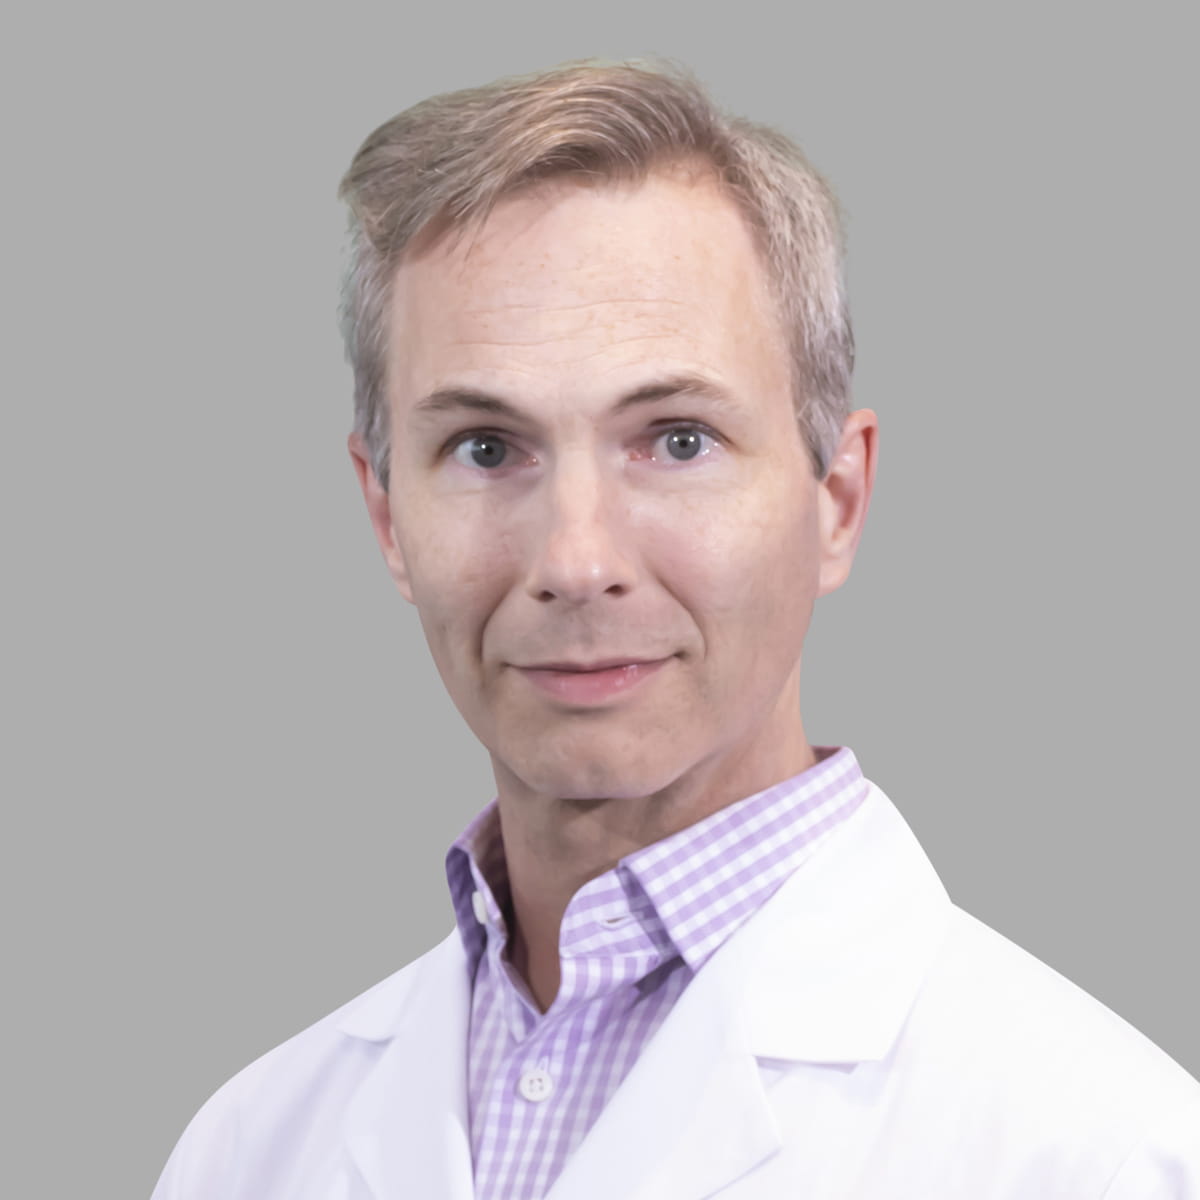 A friendly image of Stephen Cox, MD